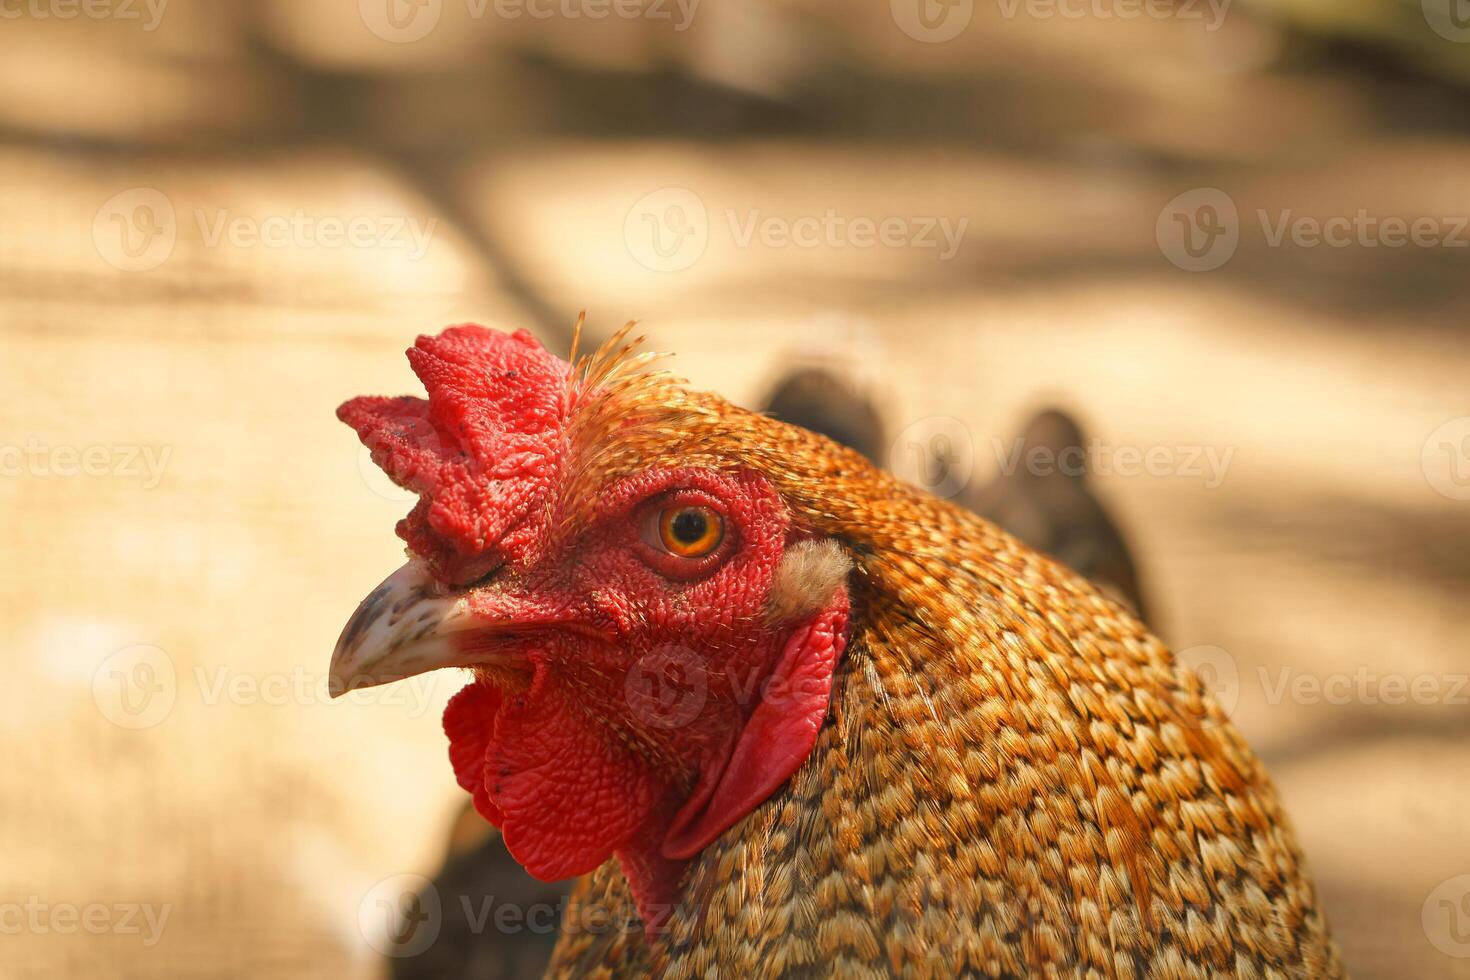 Brown chicken with red comb. Farm animal on a farm. Feathers and beak, portrait photo